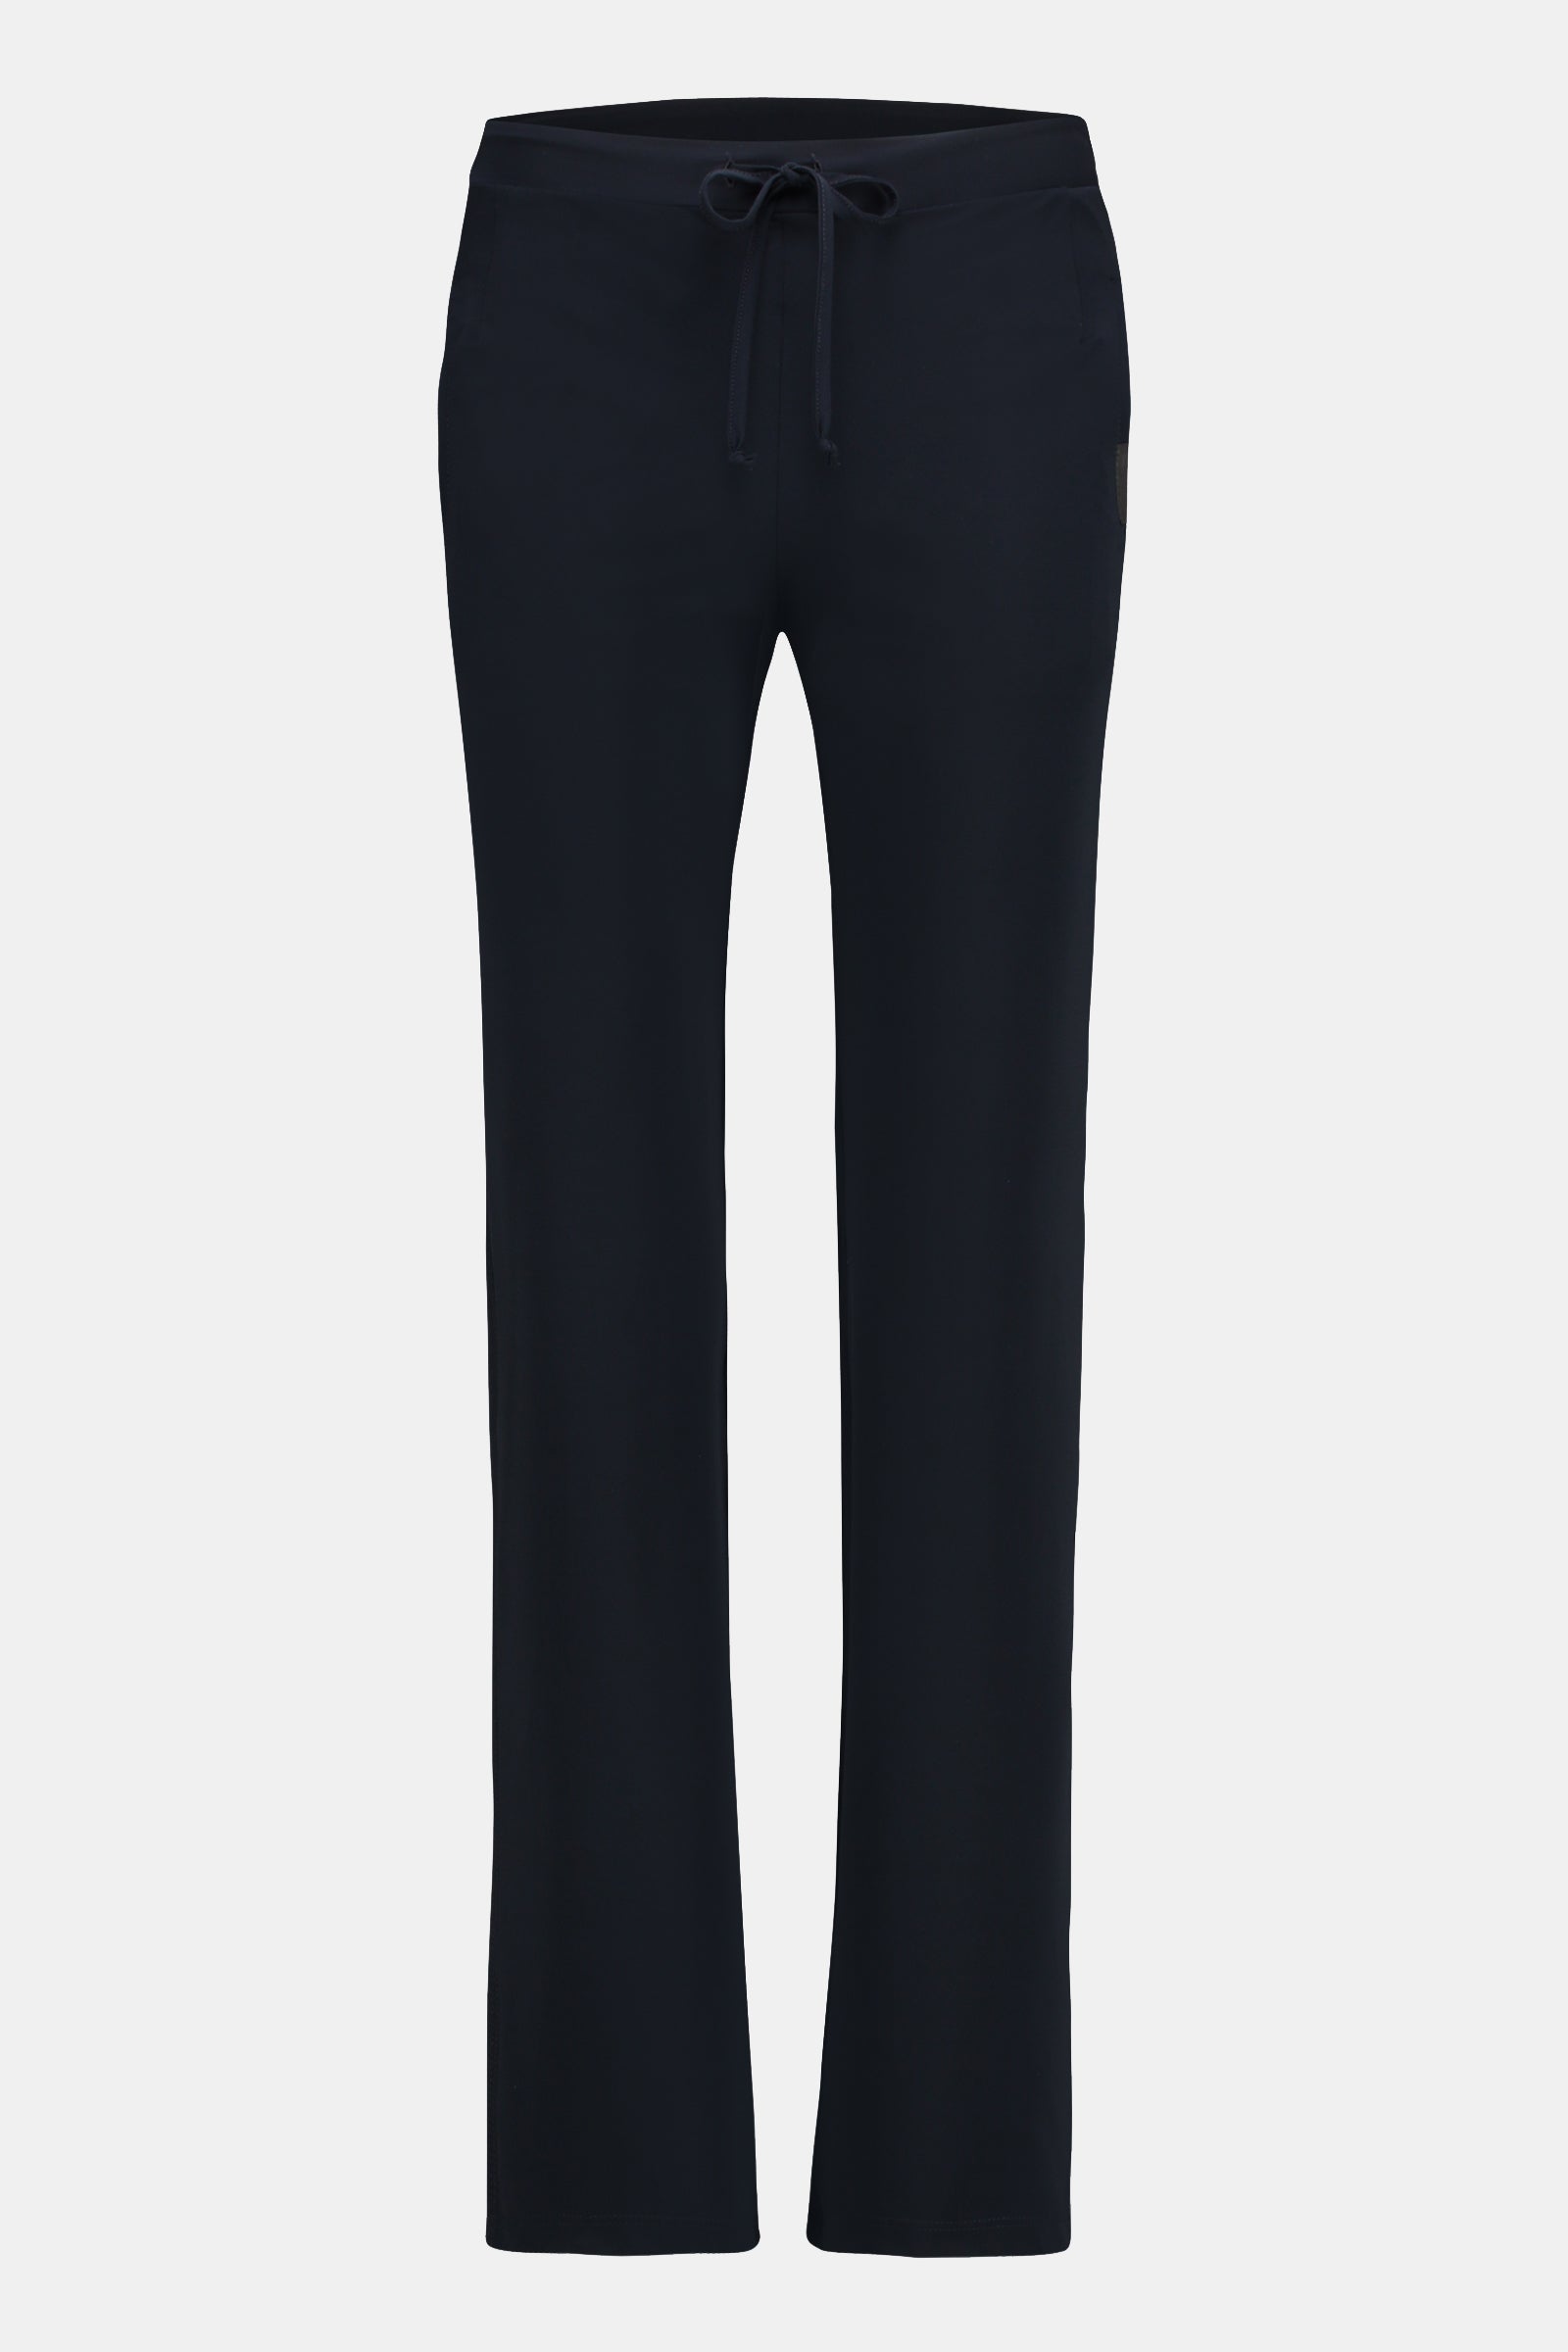 TROUSERS (DALLAS) NAVY